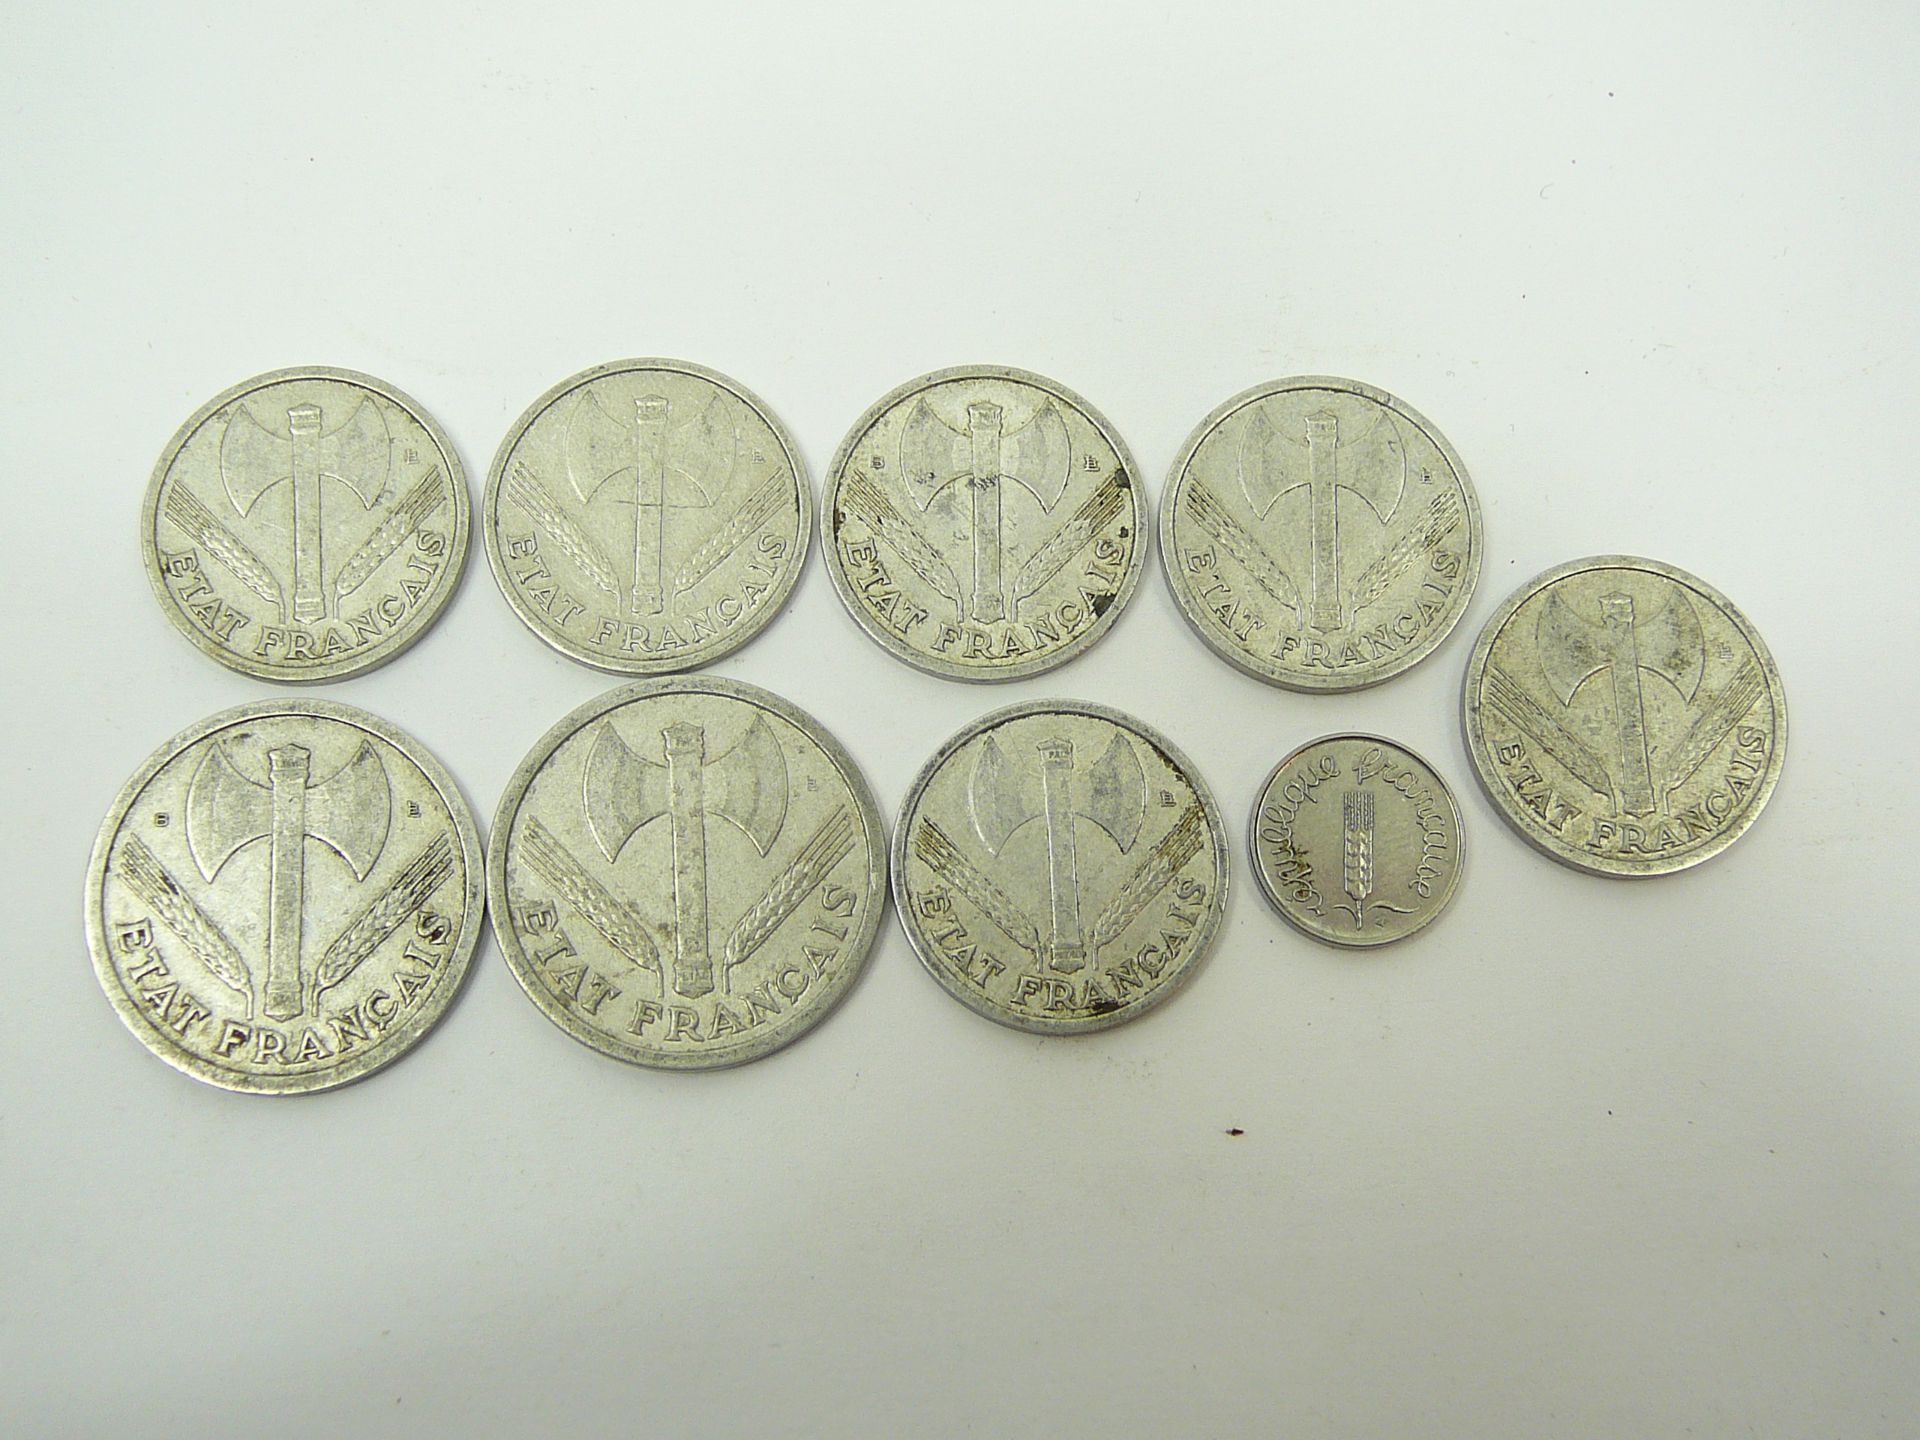 Assd WW2 Occupied France coinage